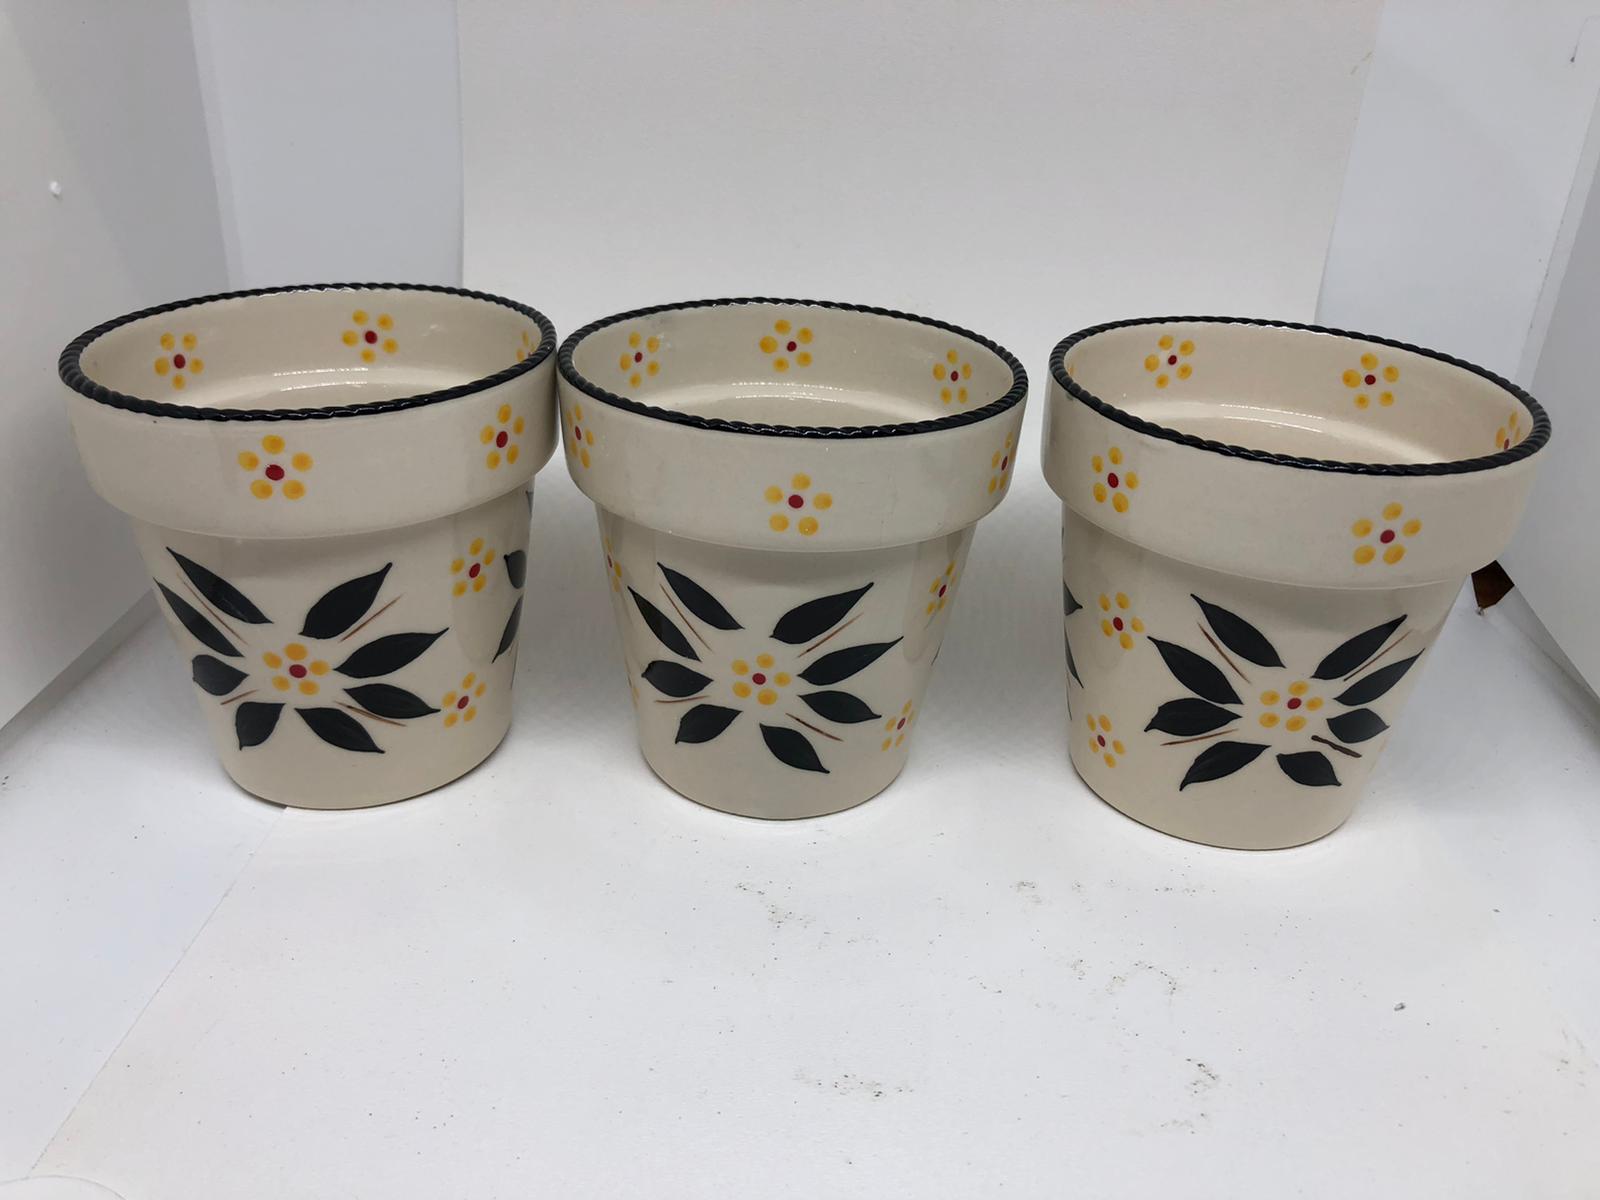 "As is" Temp-tations Old World Set of 3 Centertaining Cups